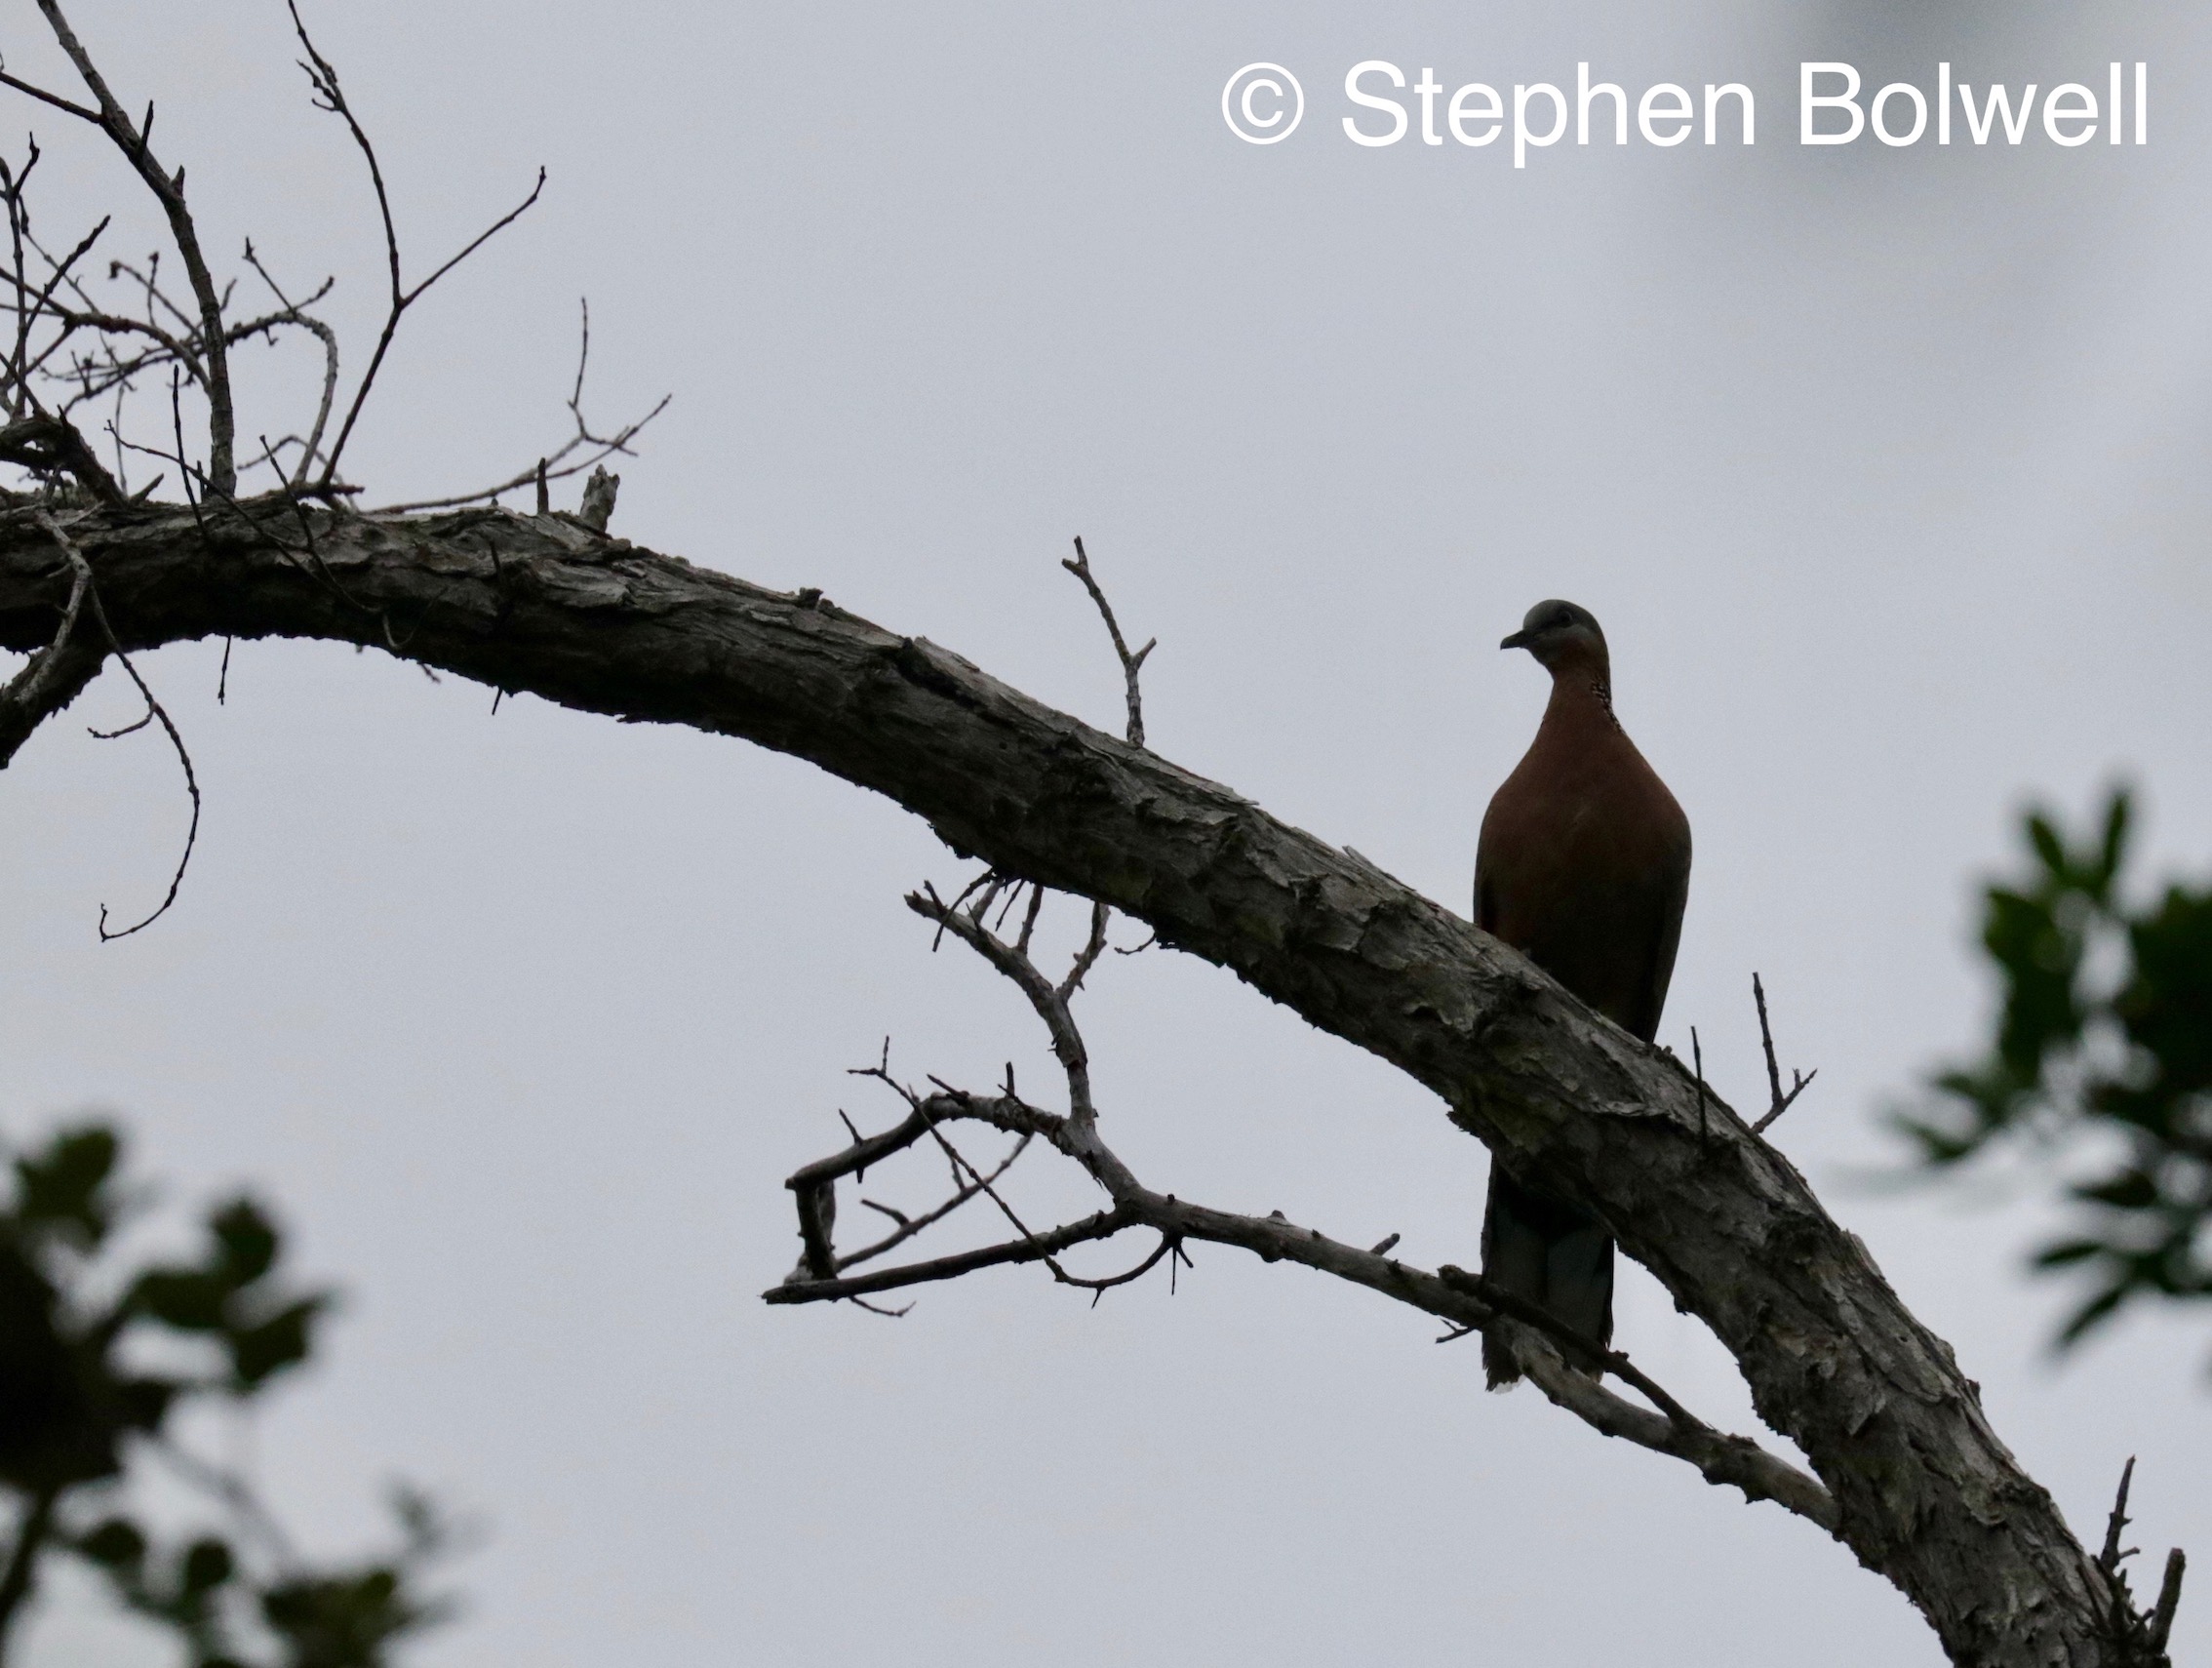 A spotted dove I think in the forest - taken to demonstrate the vog skies that make bird photography impossible